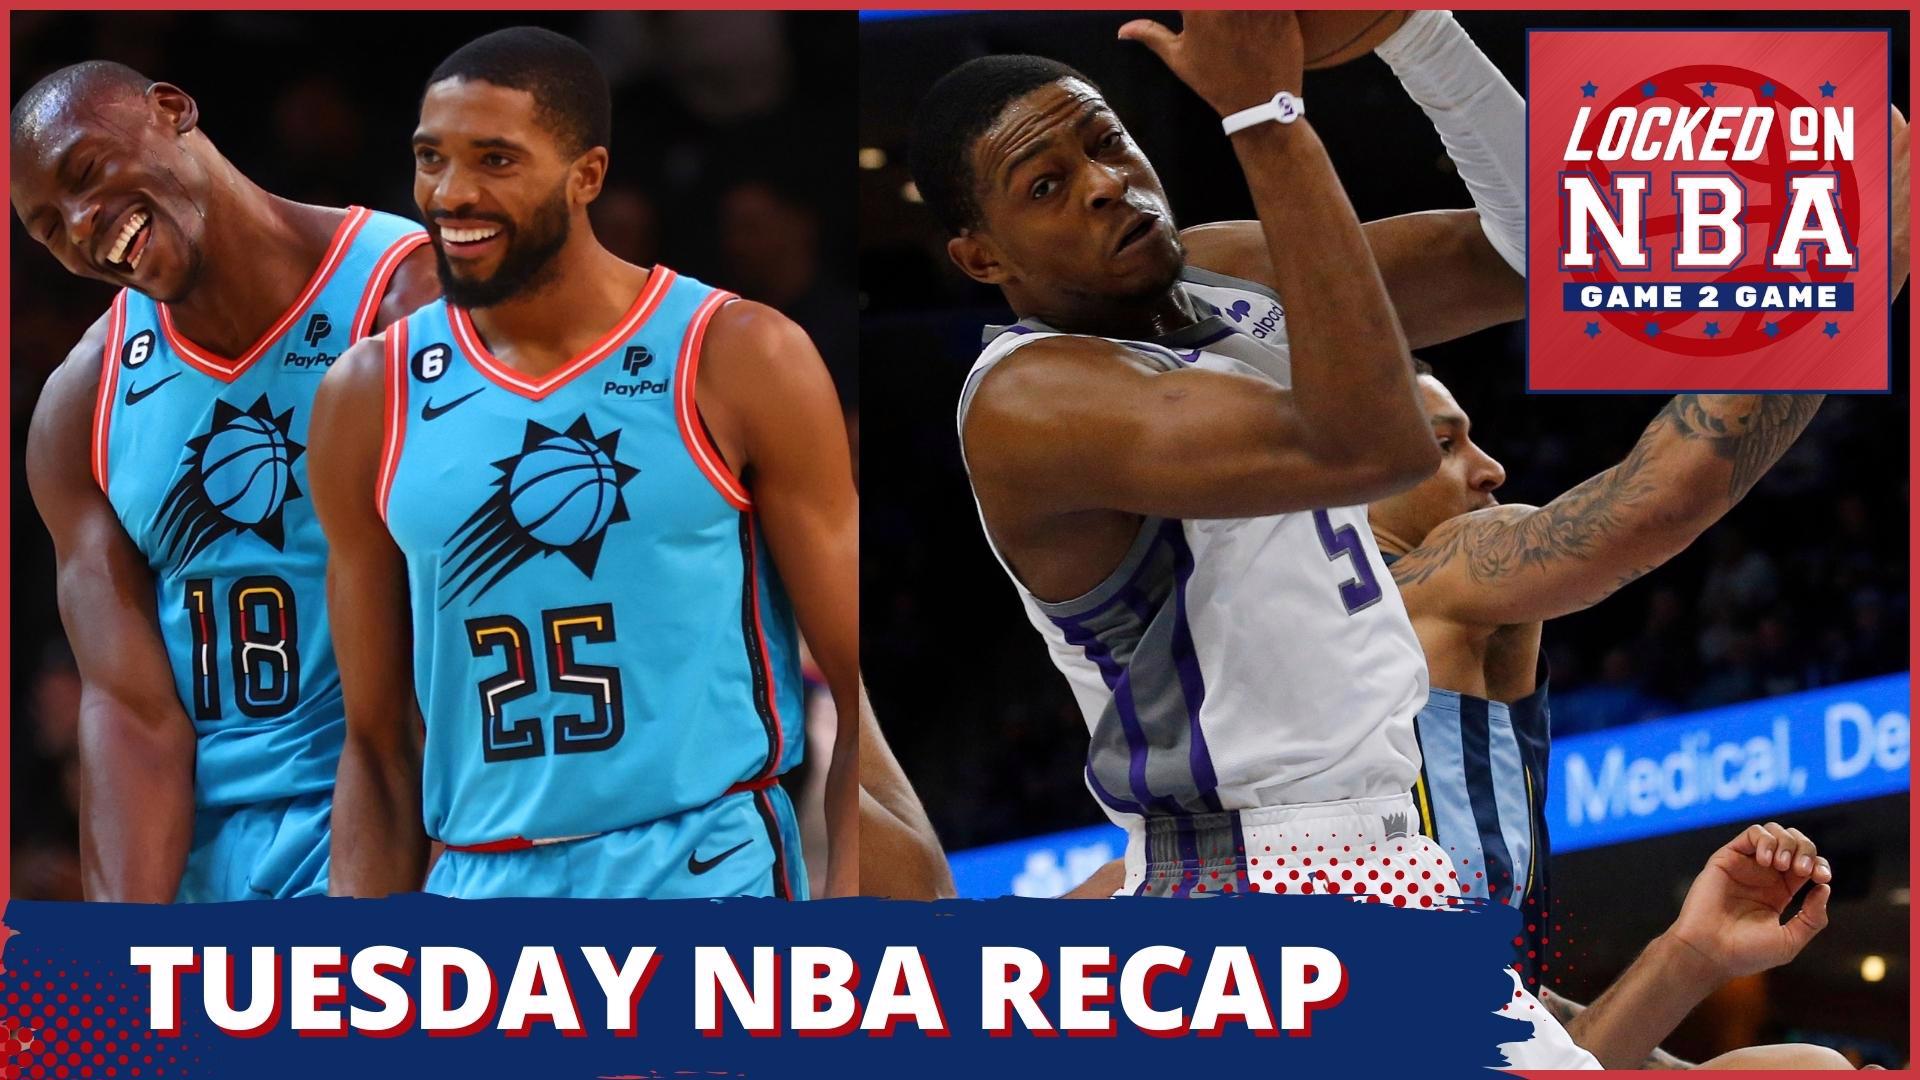 A breakdown of the latest NBA games from the Sixers winning in Simmons' return game to the Kings surviving the Grizzlies.